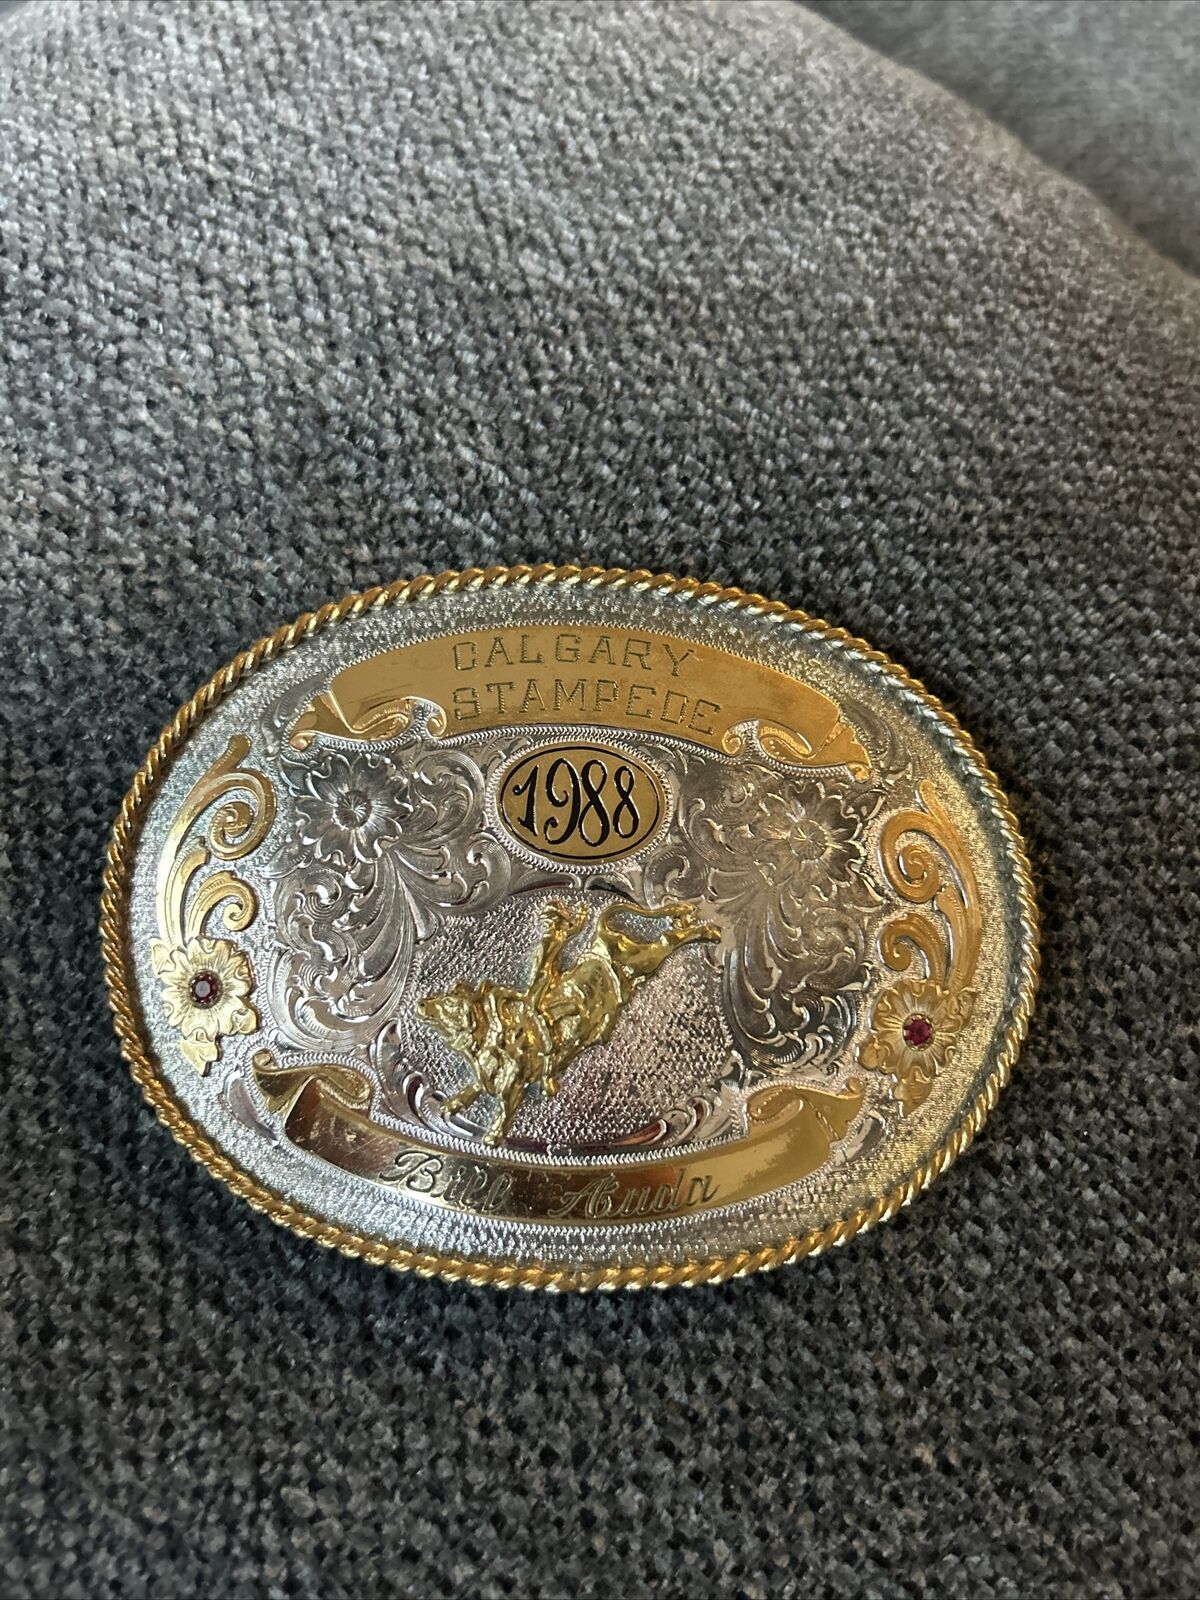 Montana Silversmiths  1988 Calgary stampede Rodeo Buckle